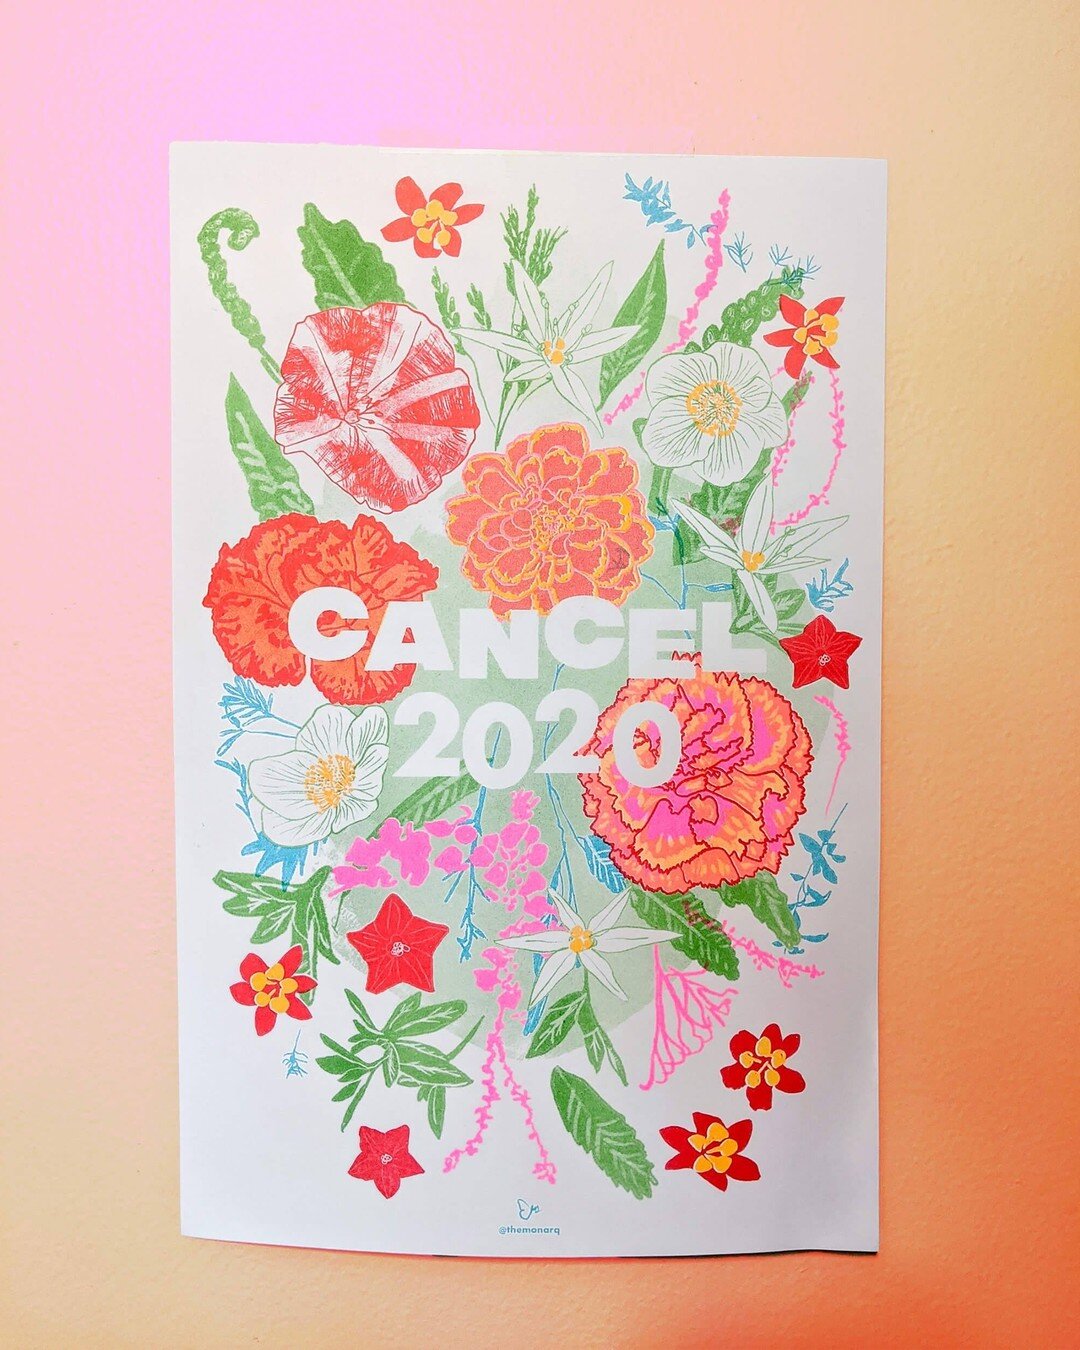 ⁣Thank you @paperpresspunch for working with me to print this visual spell! This 5 color risograph poster is definitely a mood 🙃⠀
⠀
Each hand drawn flower is a mix representing the chaos and despair of the year 2020 but also resiliency and strength: